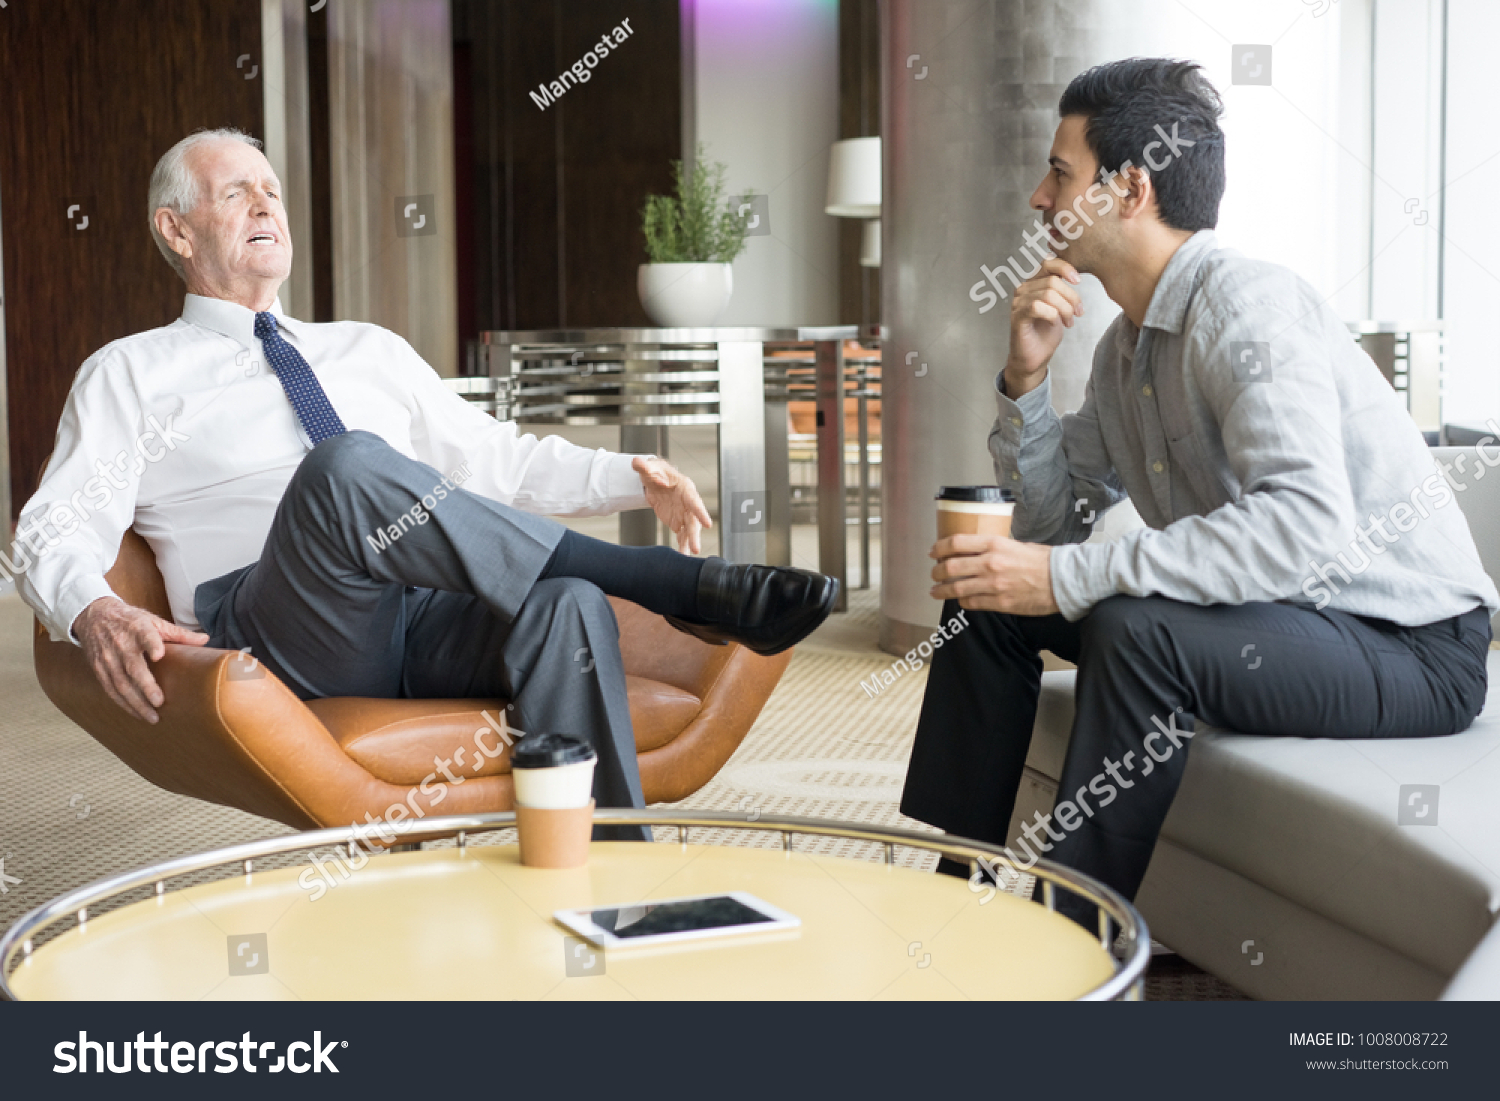 Two Business People Conversing in Office Lounge #1008008722